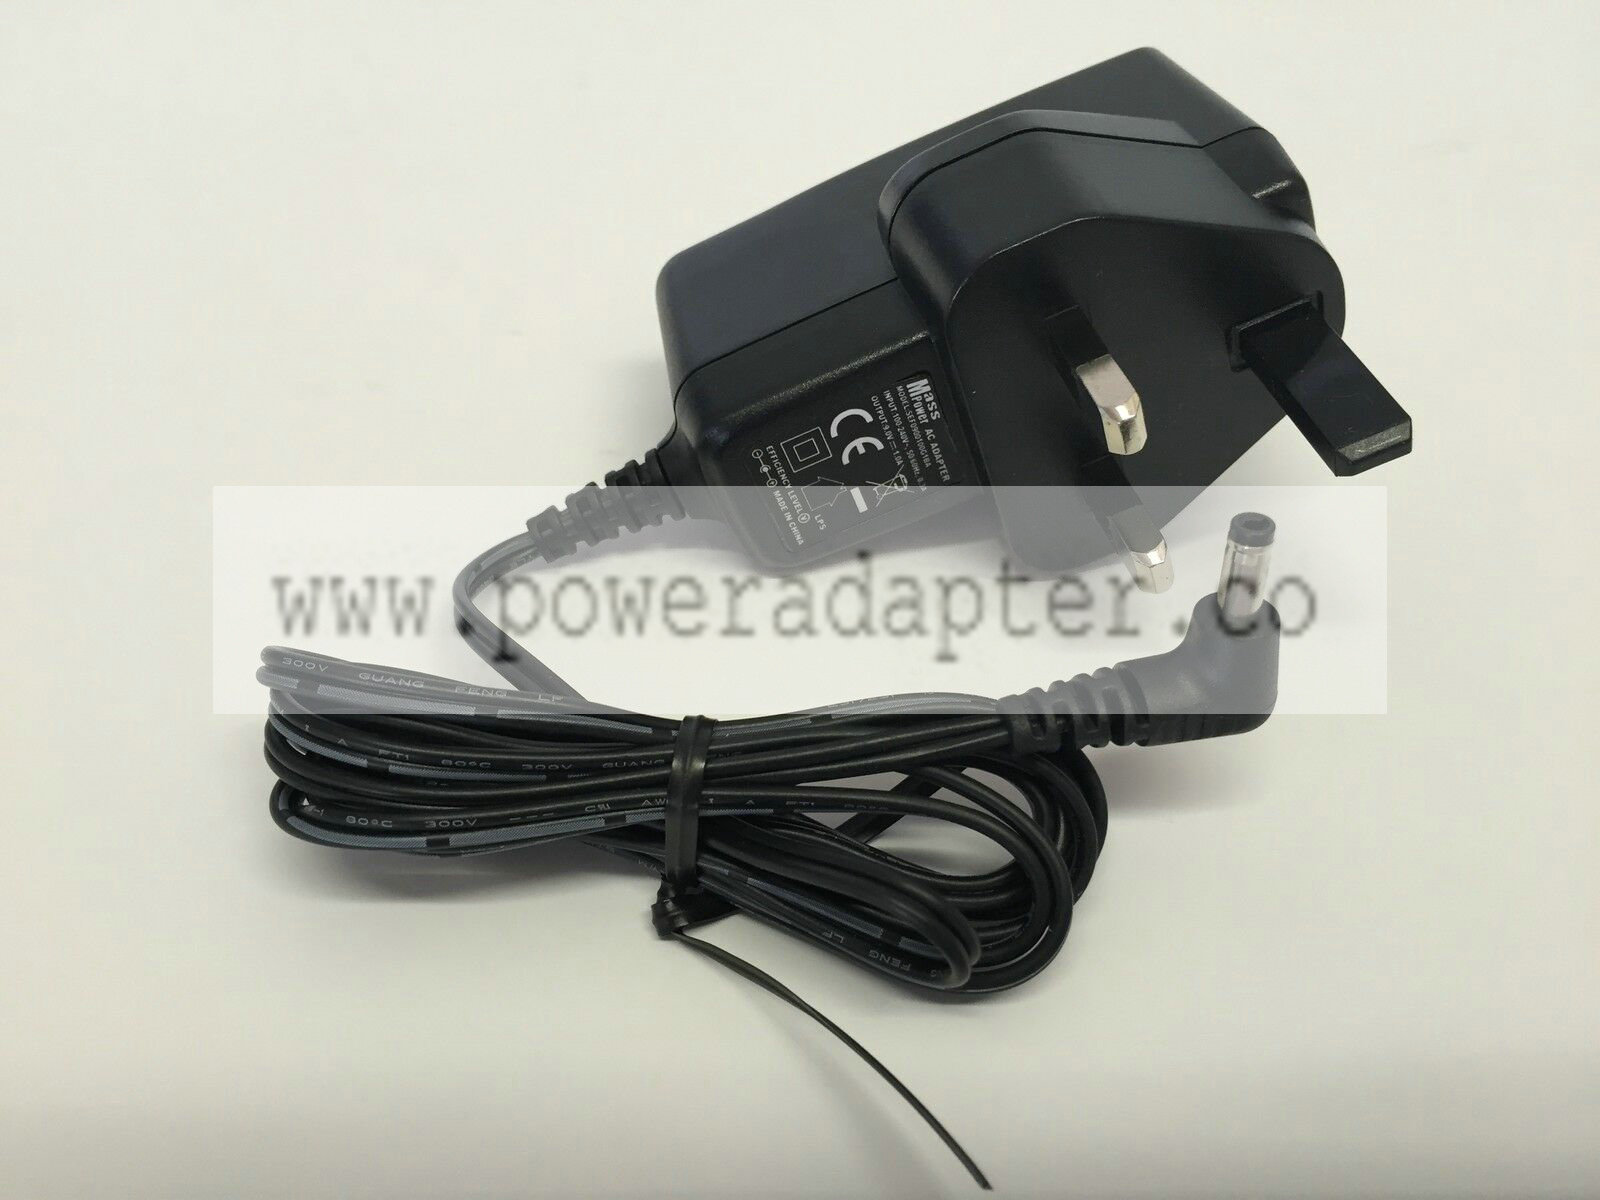 Goodmans GDVDPLY01 Portable DVD Mains Home Charger AC Adapter GENUINE ORIGINAL Type: Portable DVD Player Mains Charge